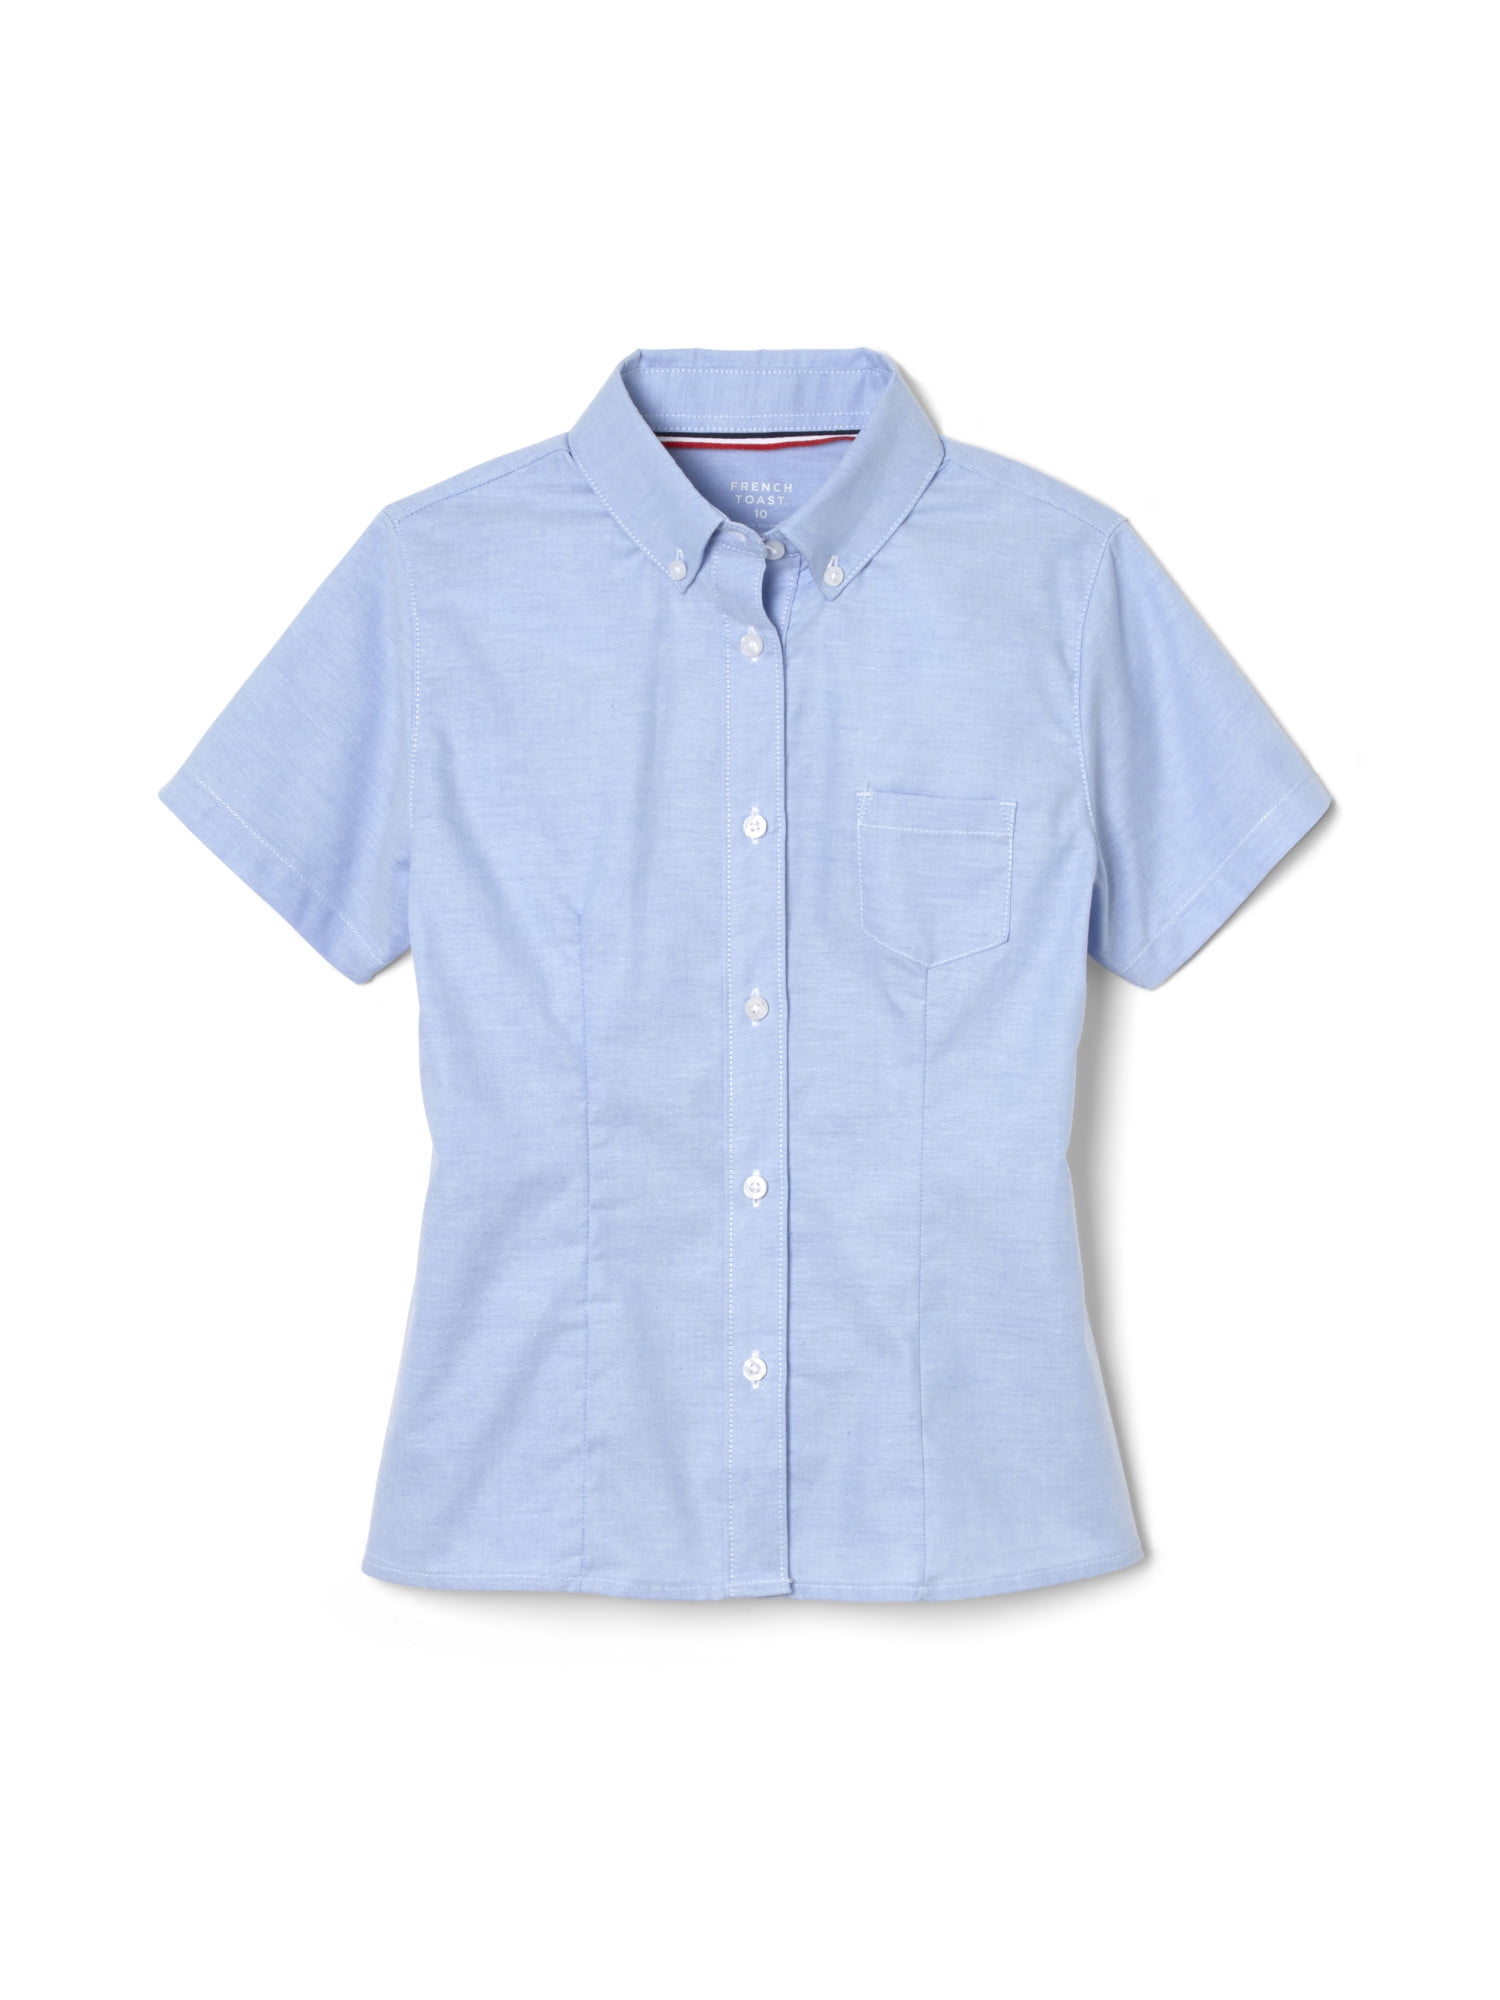 Sizes 4-7 French Toast Little Boys' L/S Button-Down Shirt 